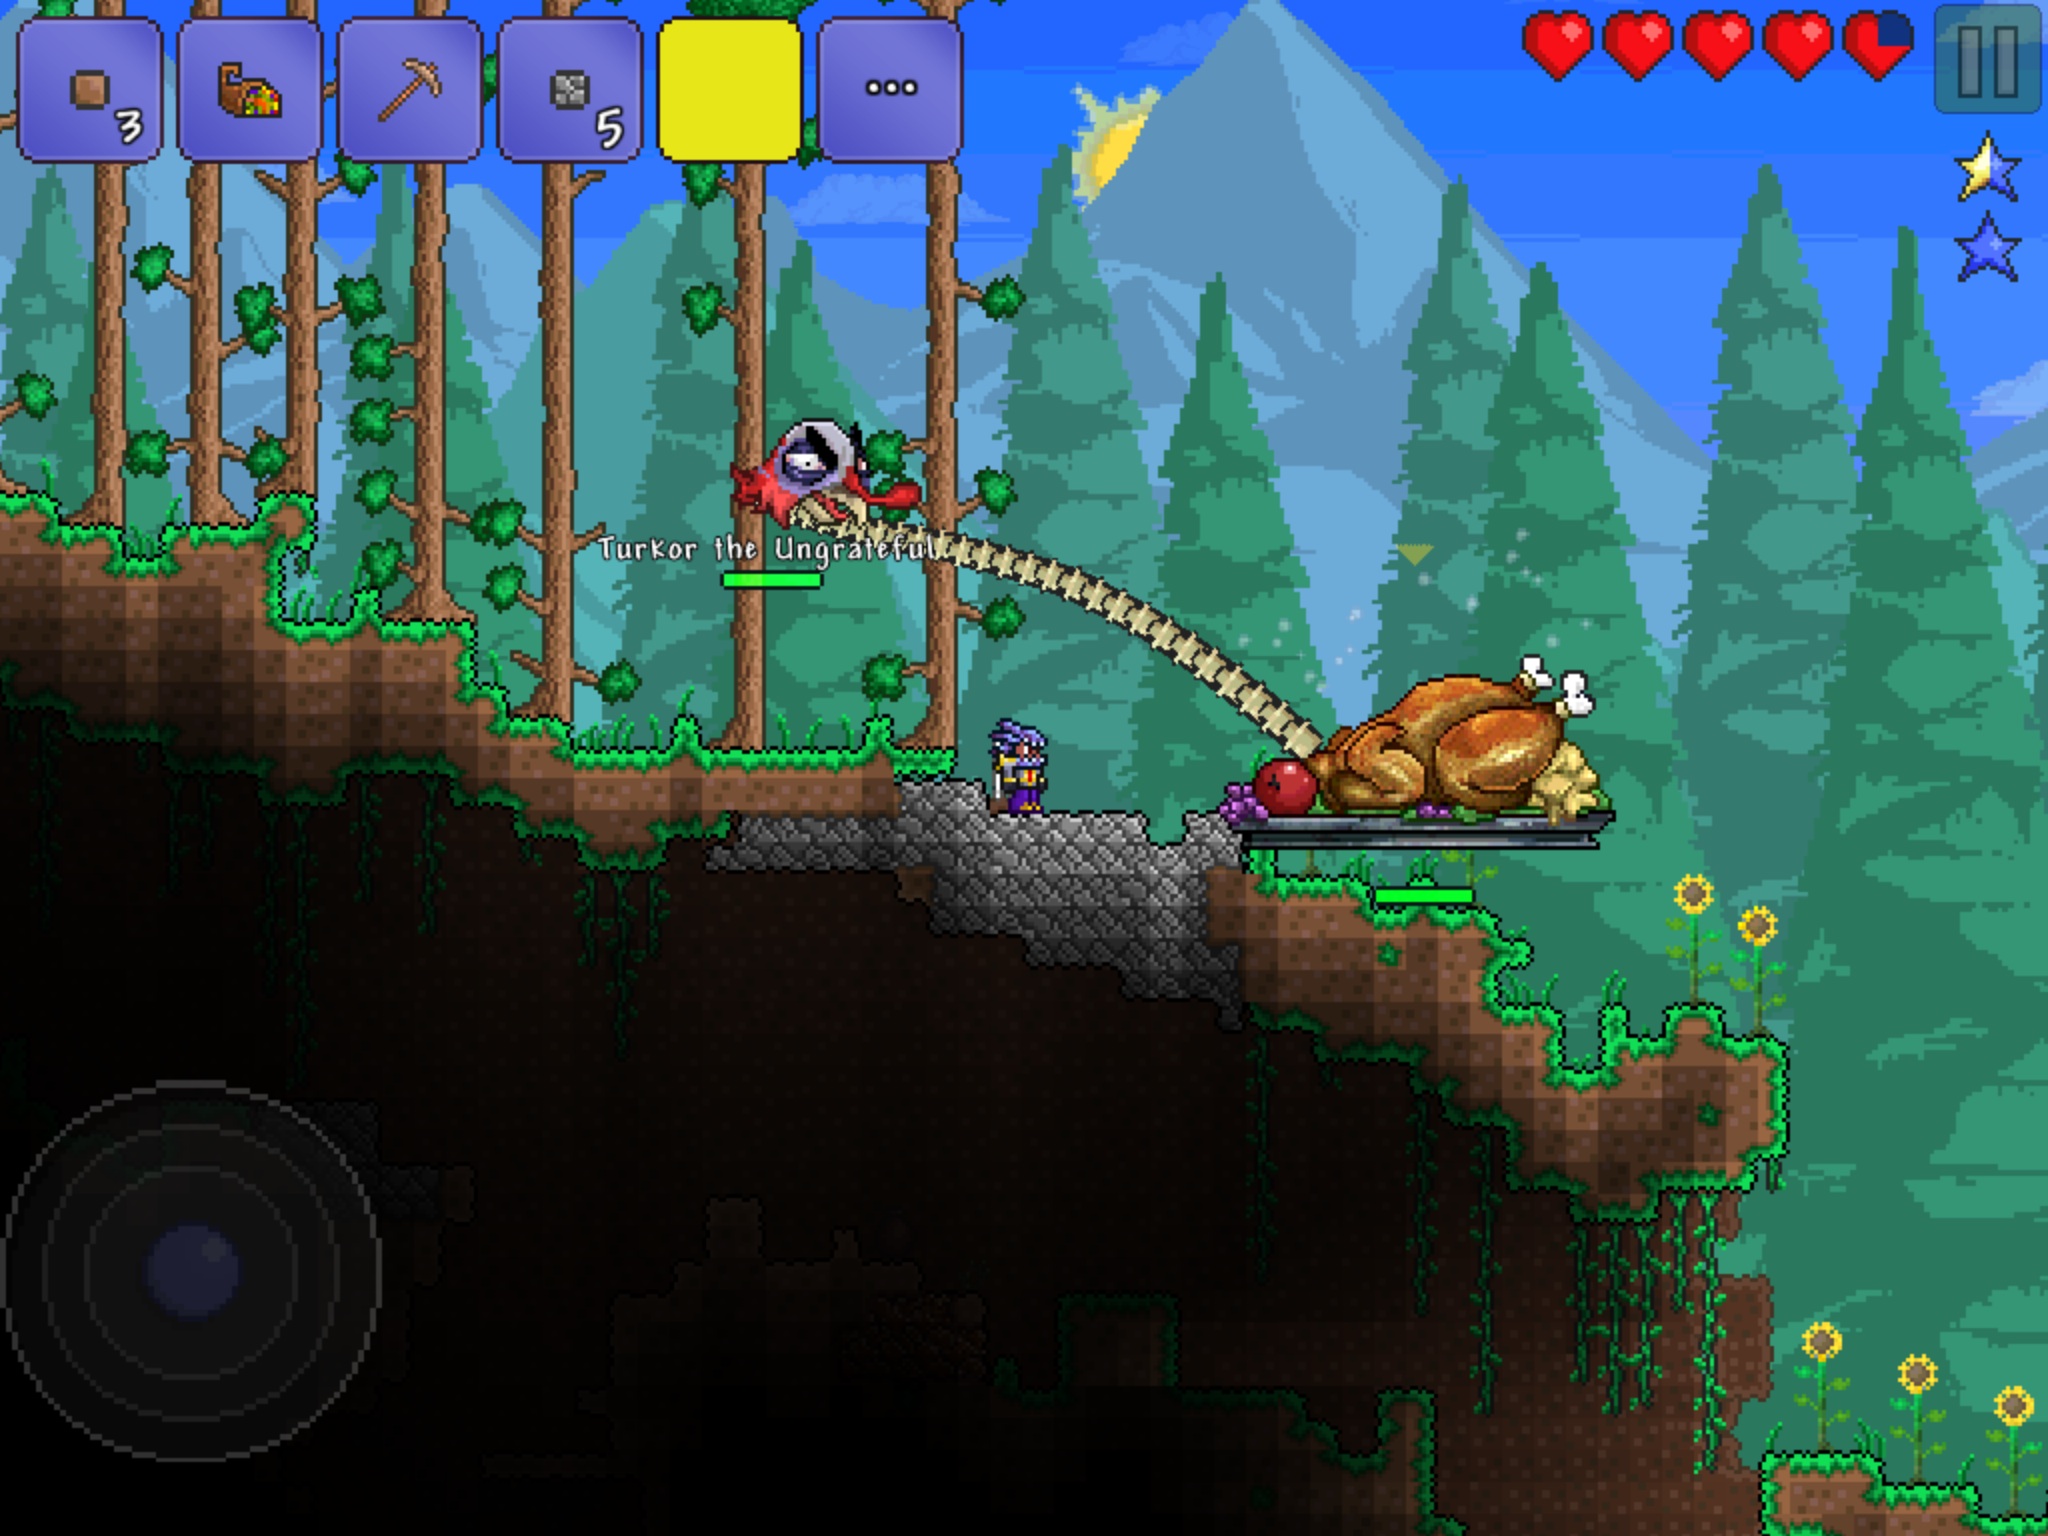 In the spirit of Thanksgiving this holiday season, we're unleashing the terrifying Turkor the Ungrateful turkey boss for players to battle in Terraria.